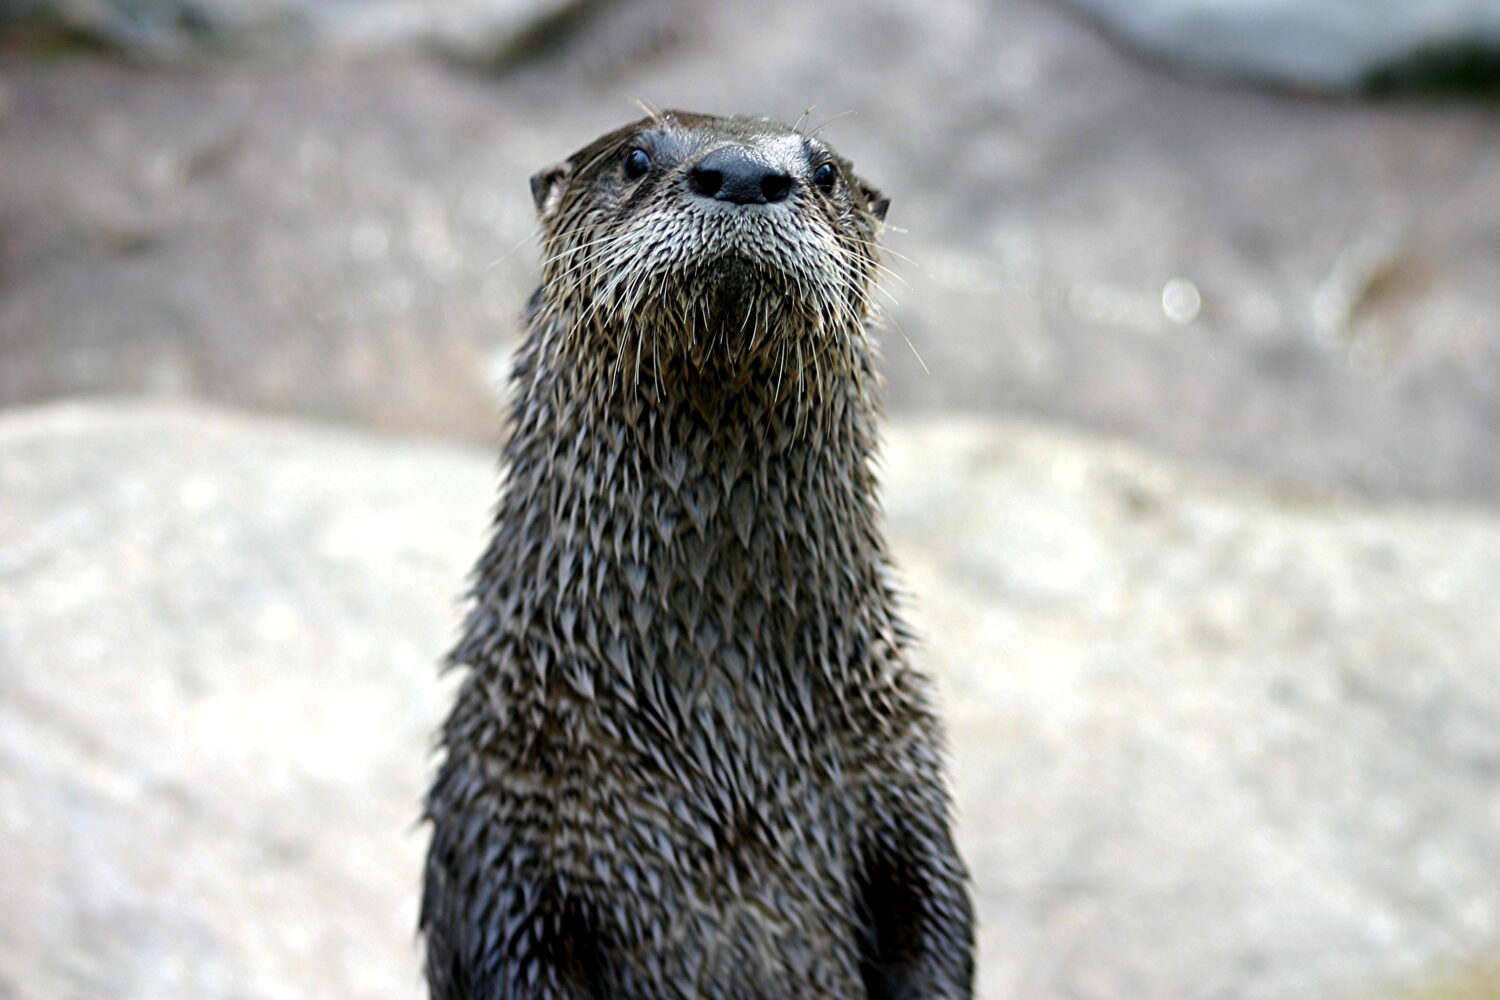 Olive the River Otter